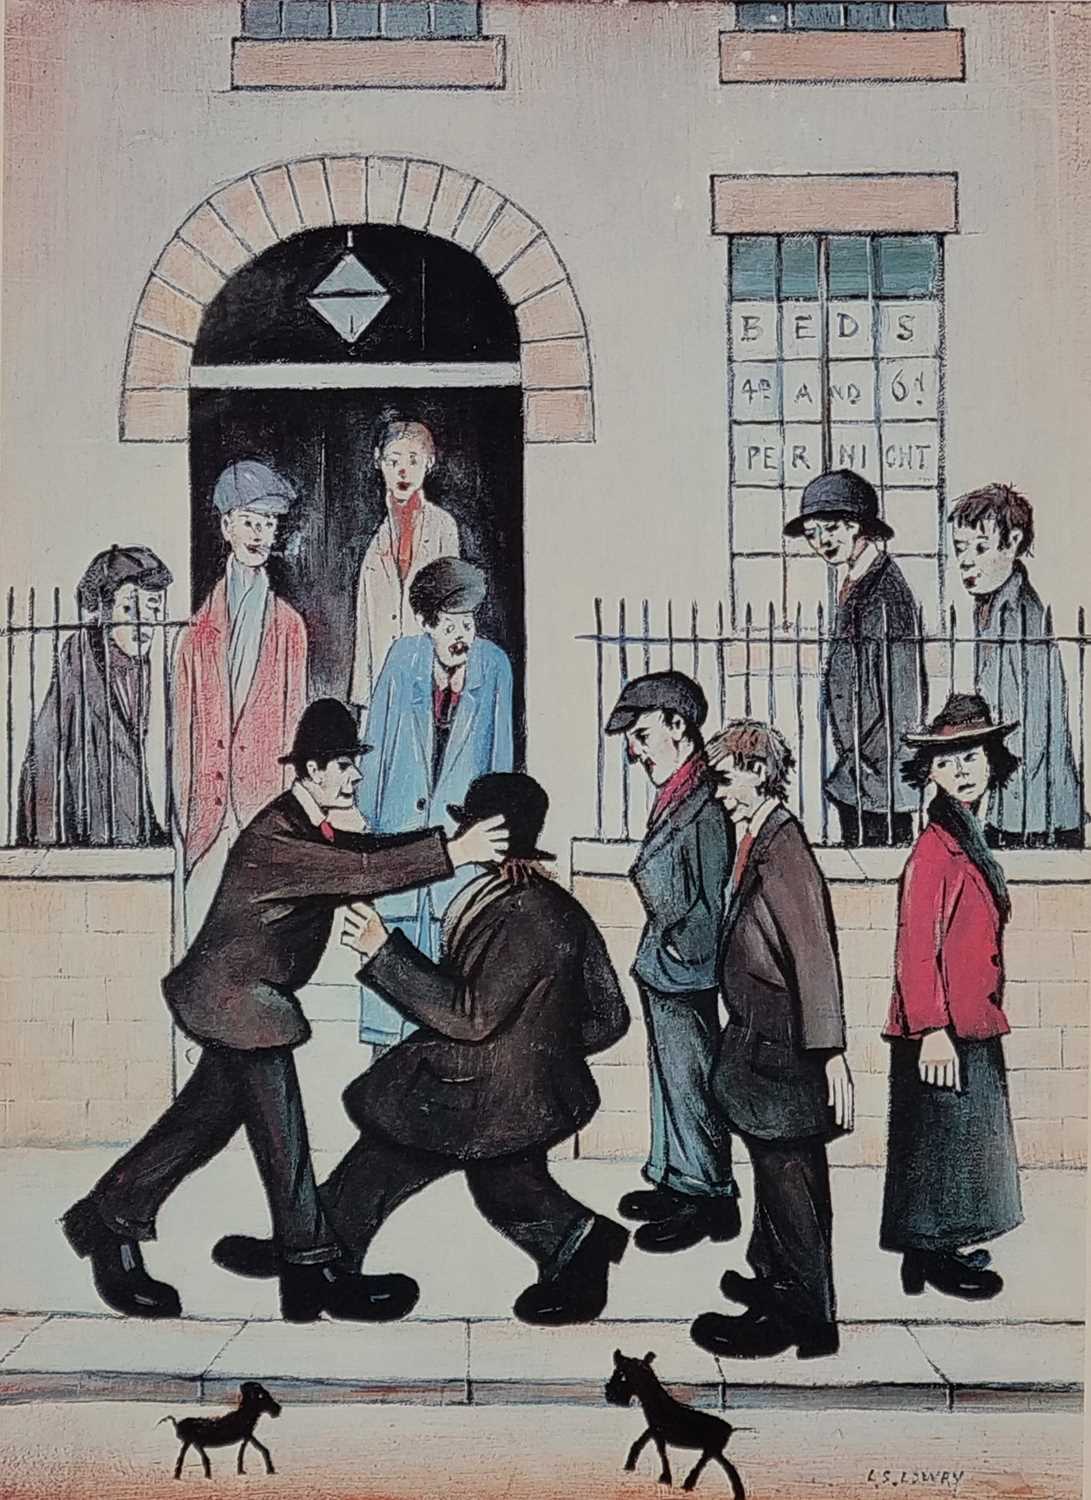 ƚ Laurence Stephen LOWRY (British 1887-1976) A Fight, Salford, Giclée print, titled on label